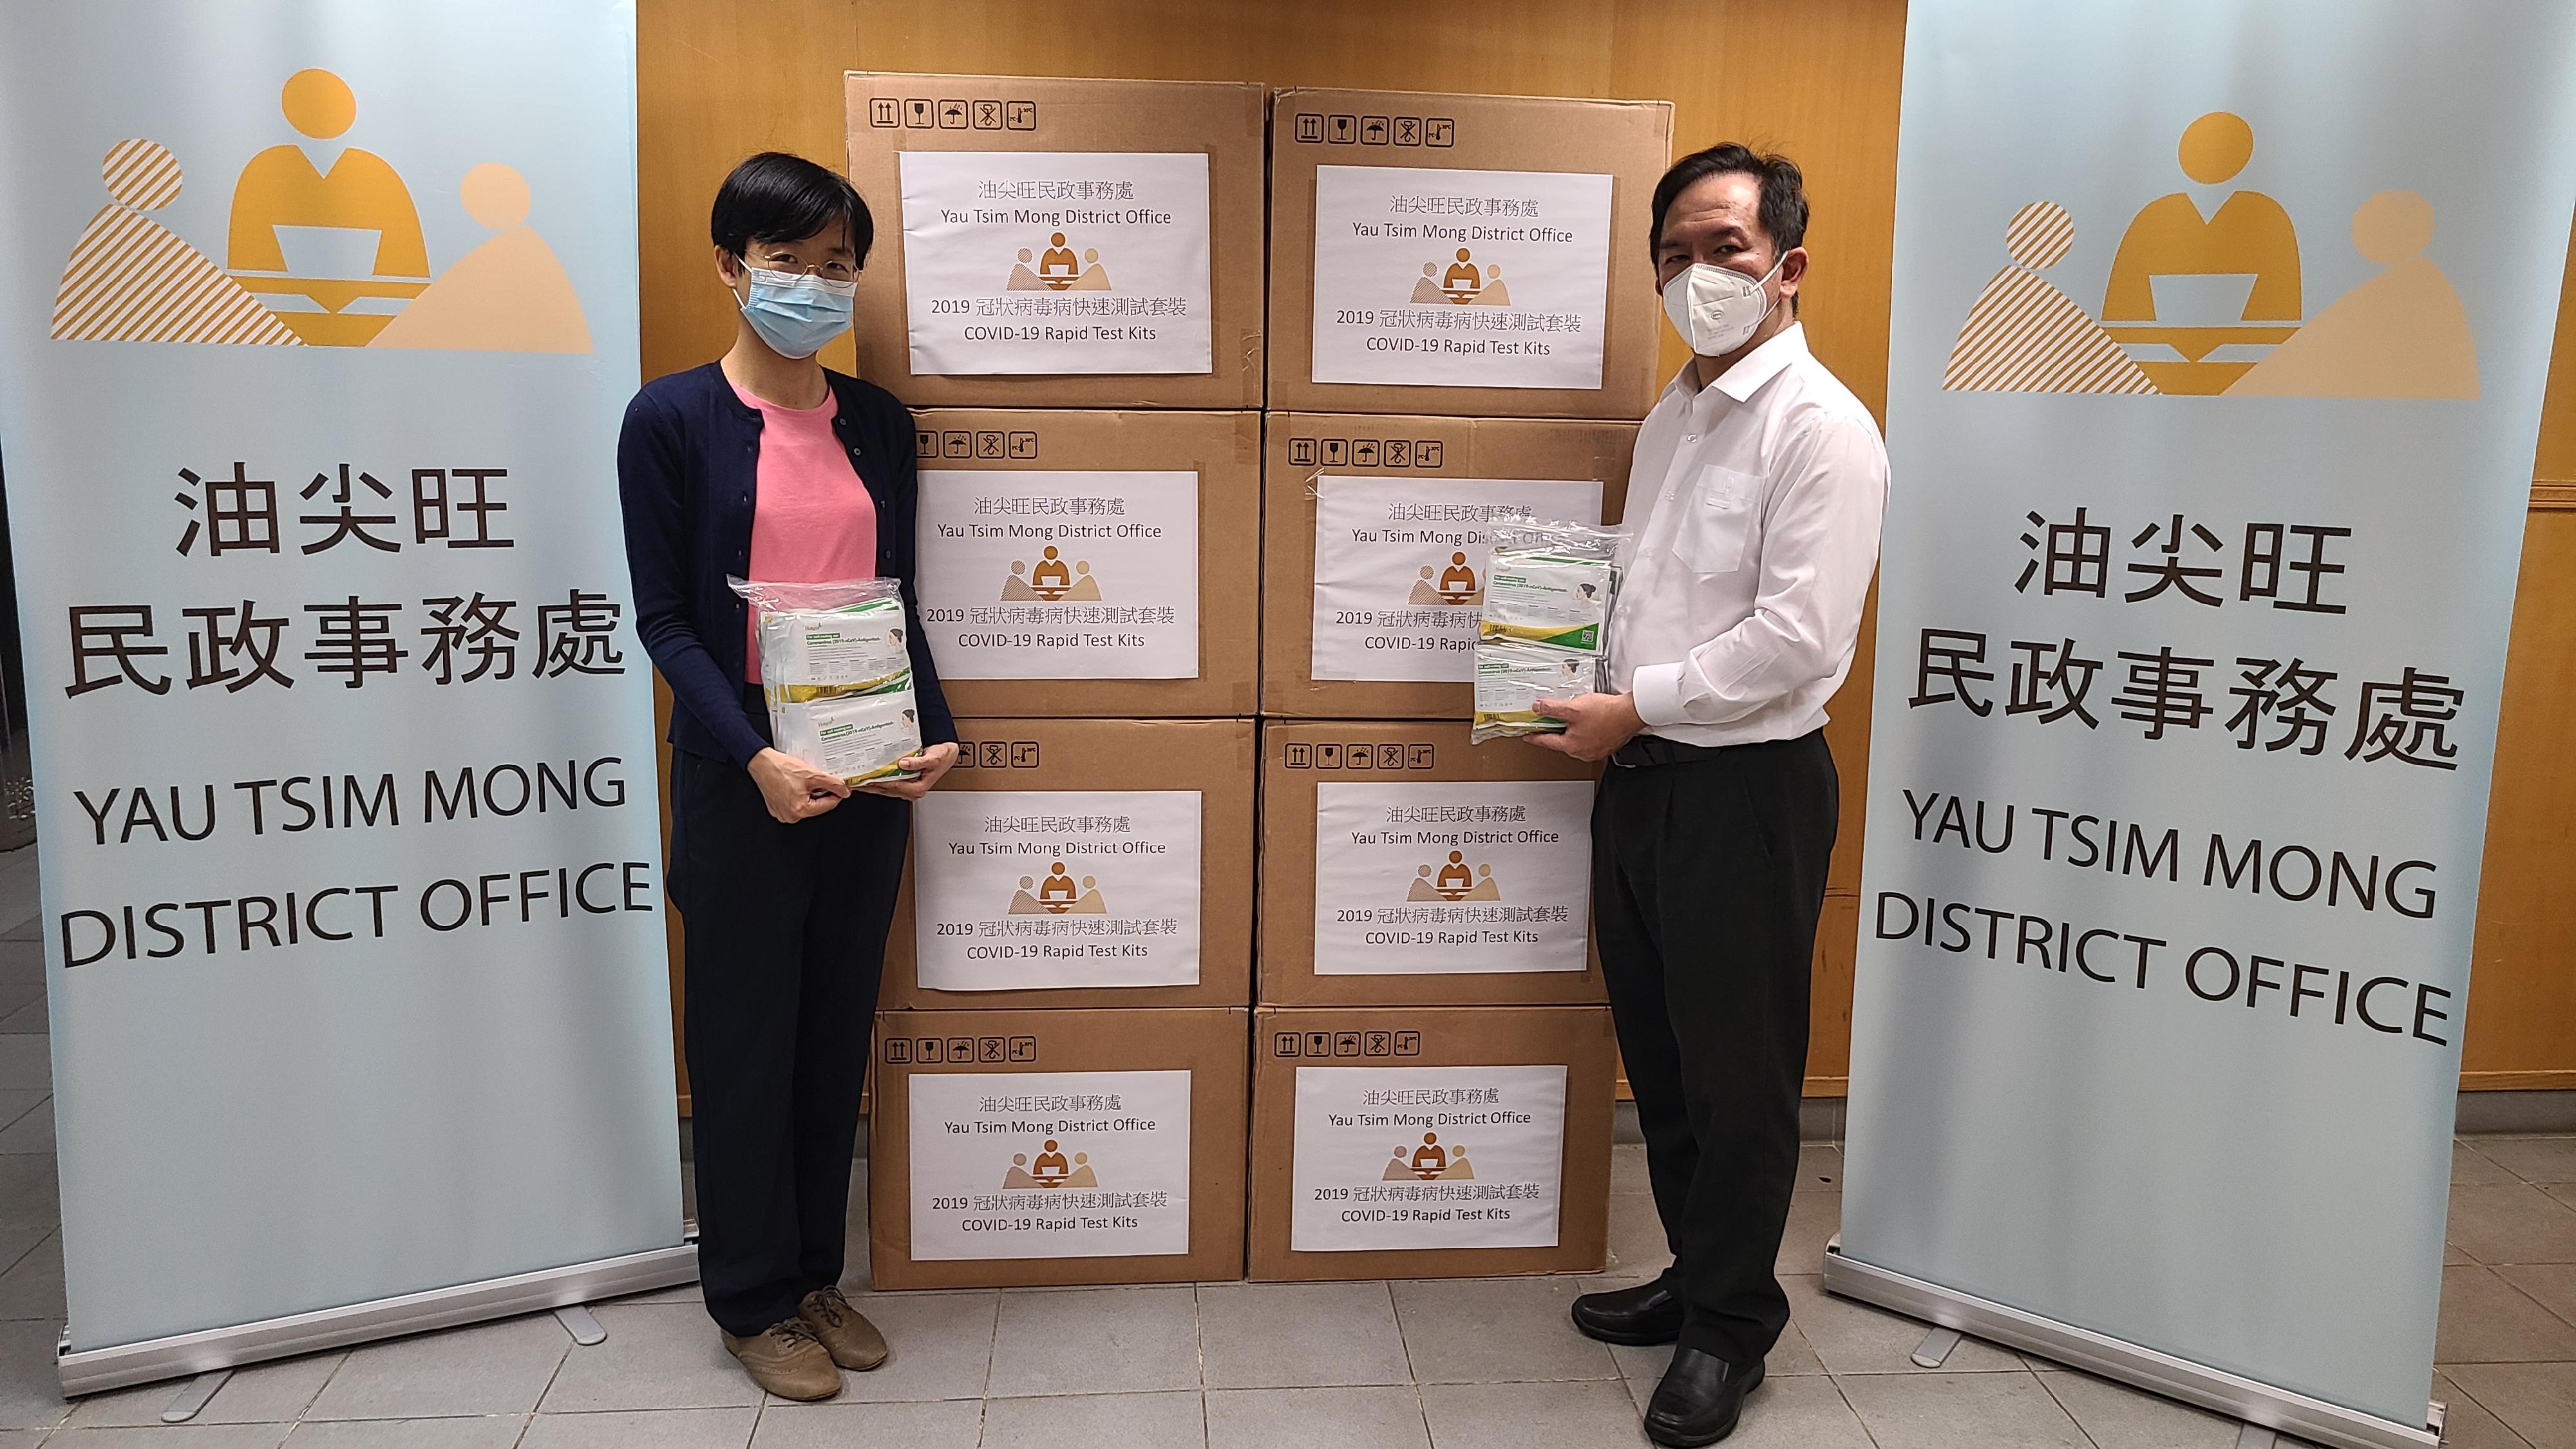 The Yau Tsim Mong District Office today (April 27) distributed COVID-19 rapid test kits to households, cleansing workers and property management staff living and working in Parc Palais for voluntary testing through the property management company.